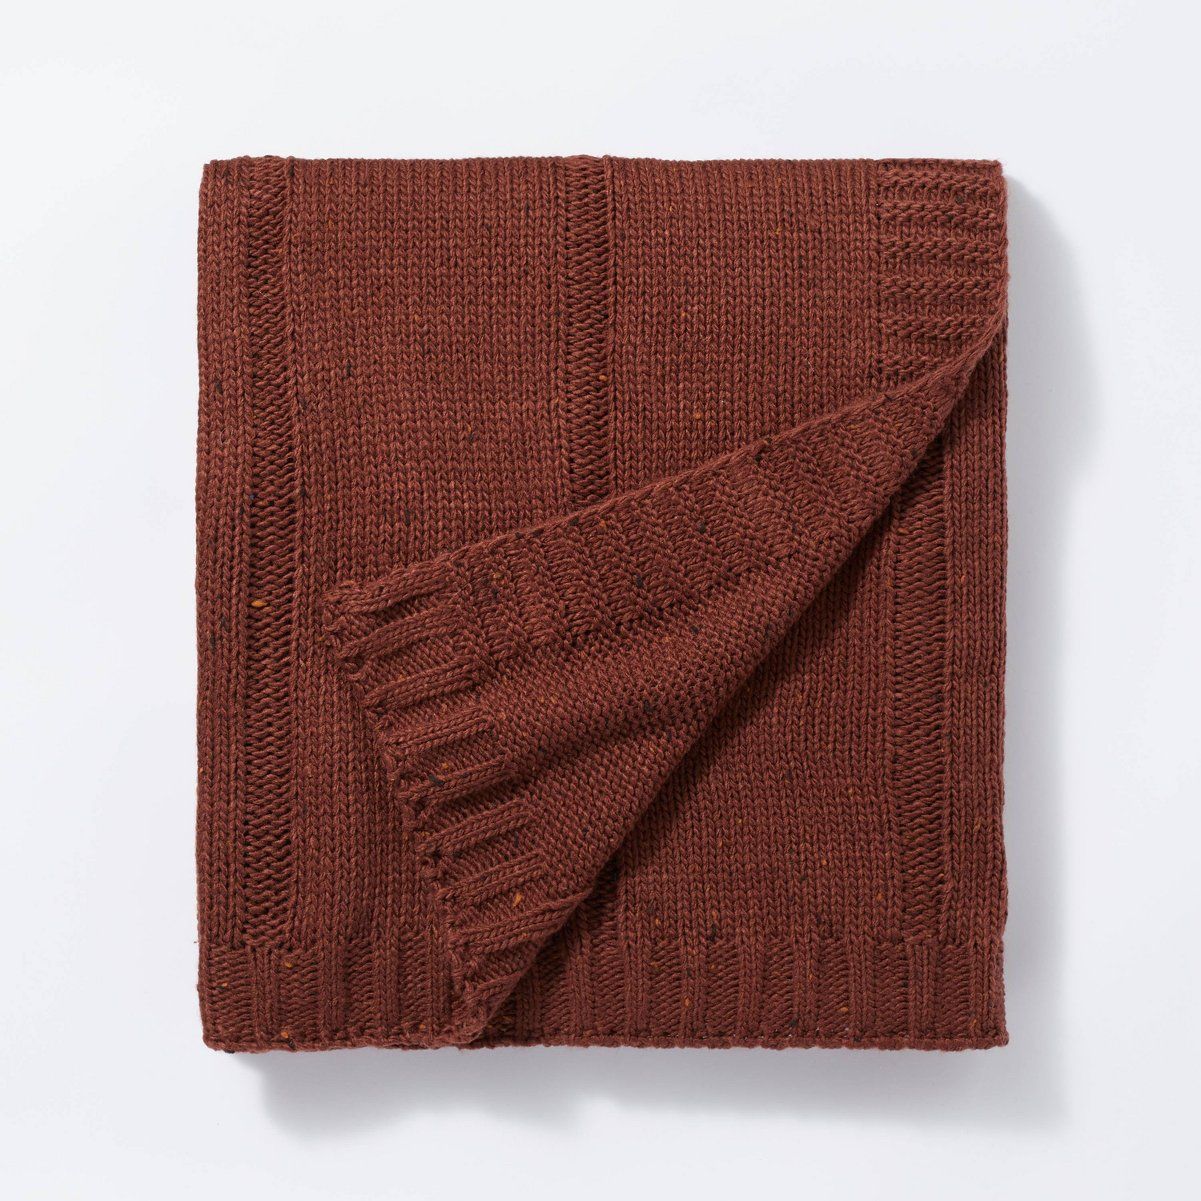 Woven Striped Knit Throw Blanket Mahogany/Neutral - Threshold™ designed with Studio McGee | Target